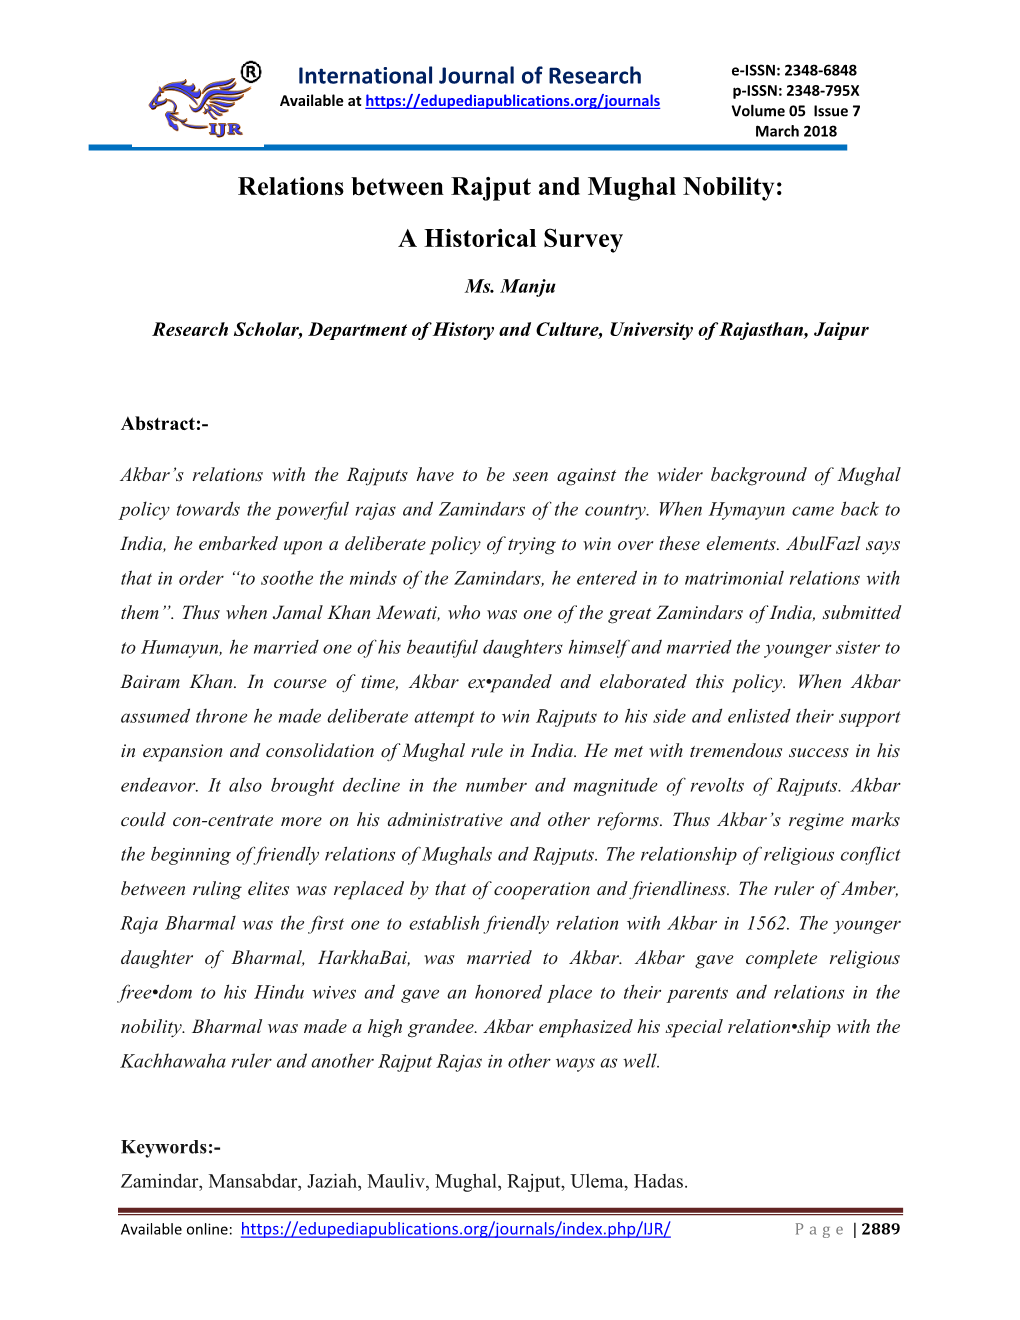 Relations Between Rajput and Mughal Nobility: a Historical Survey